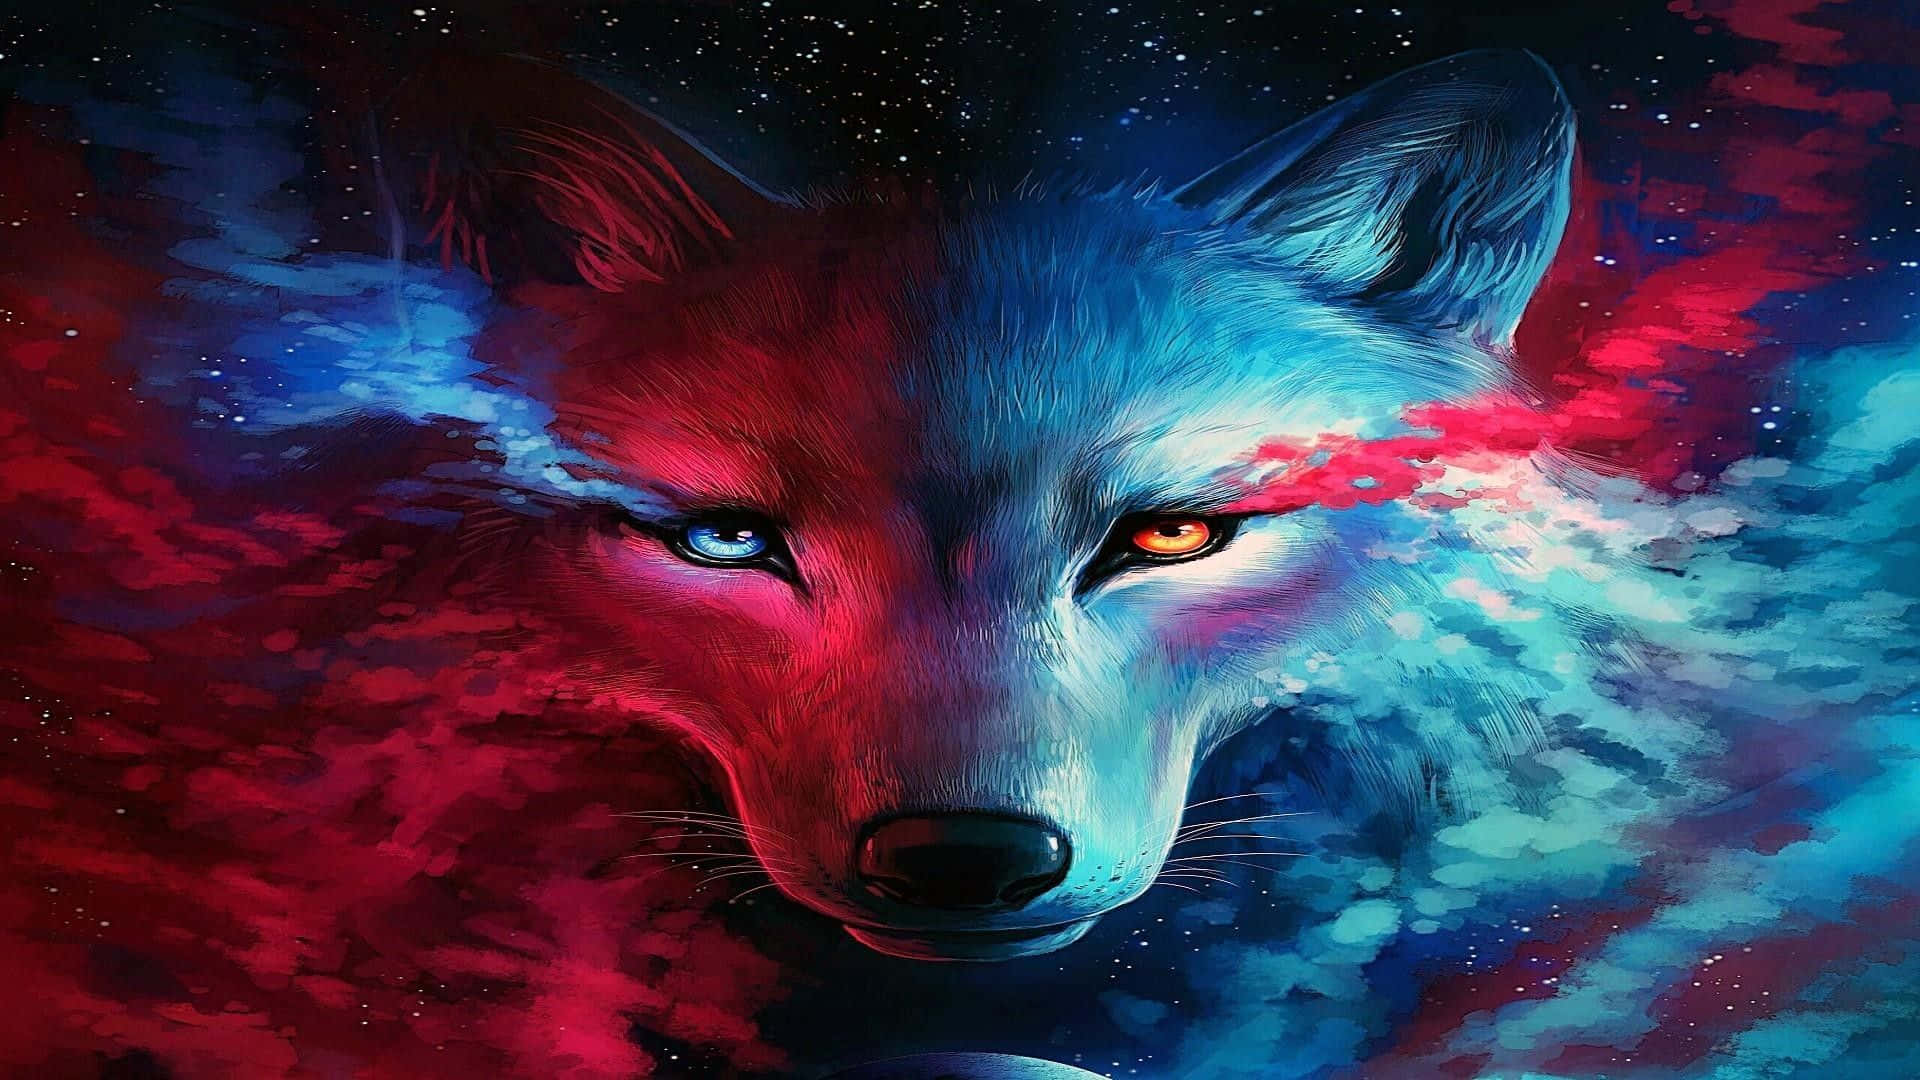 Download A Wolf With Blue And Red Eyes And A Planet In The Background ...